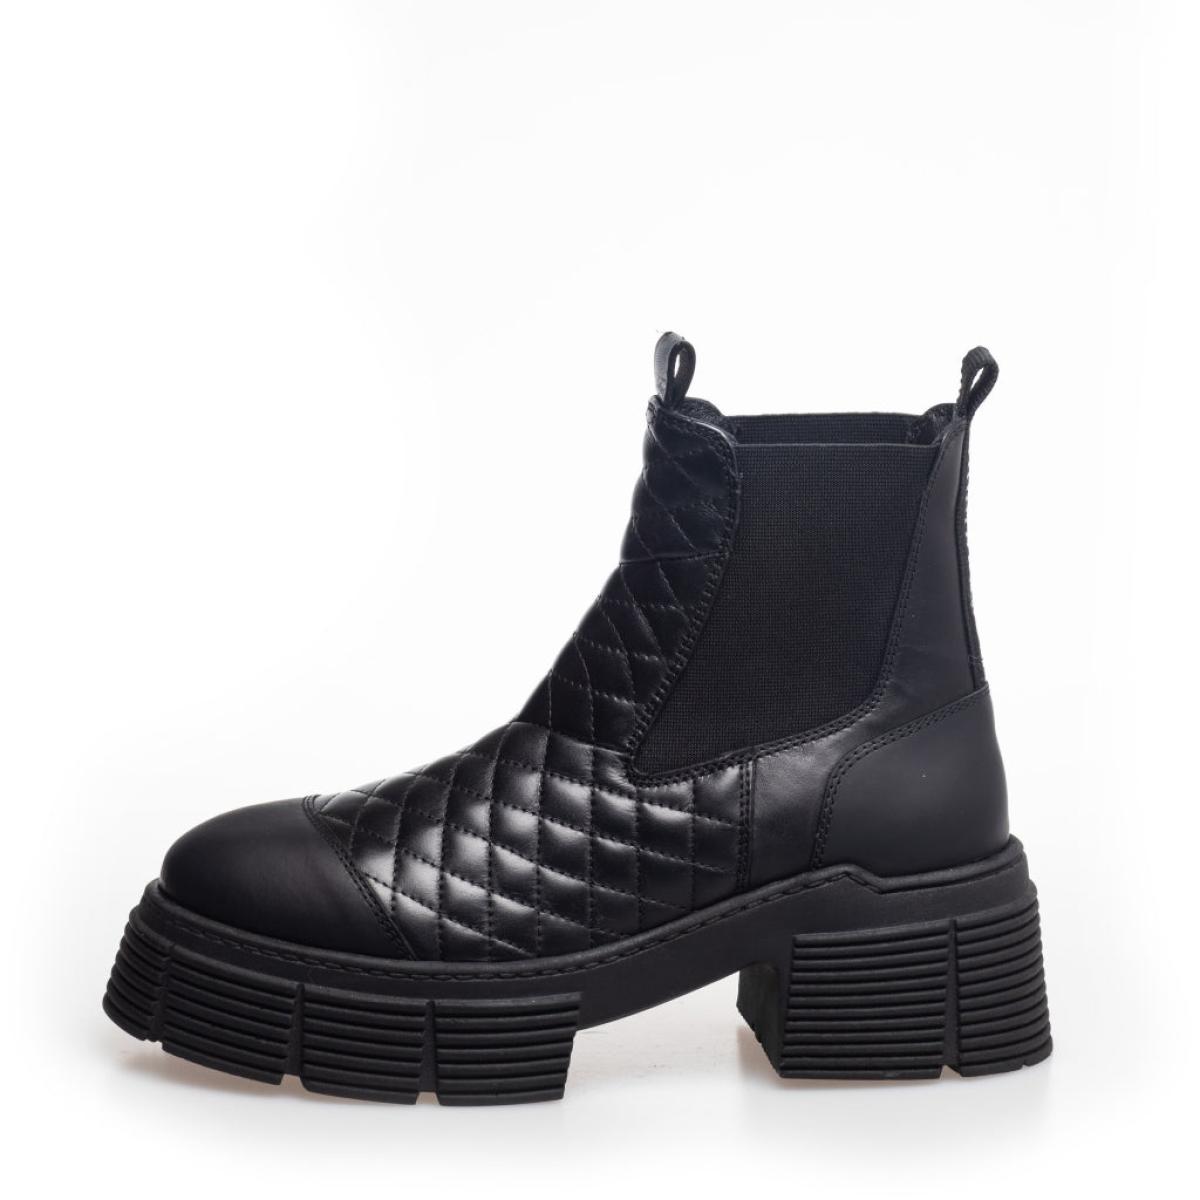 Refined Ankle Boots Be There - Black Copenhagen Shoes Women